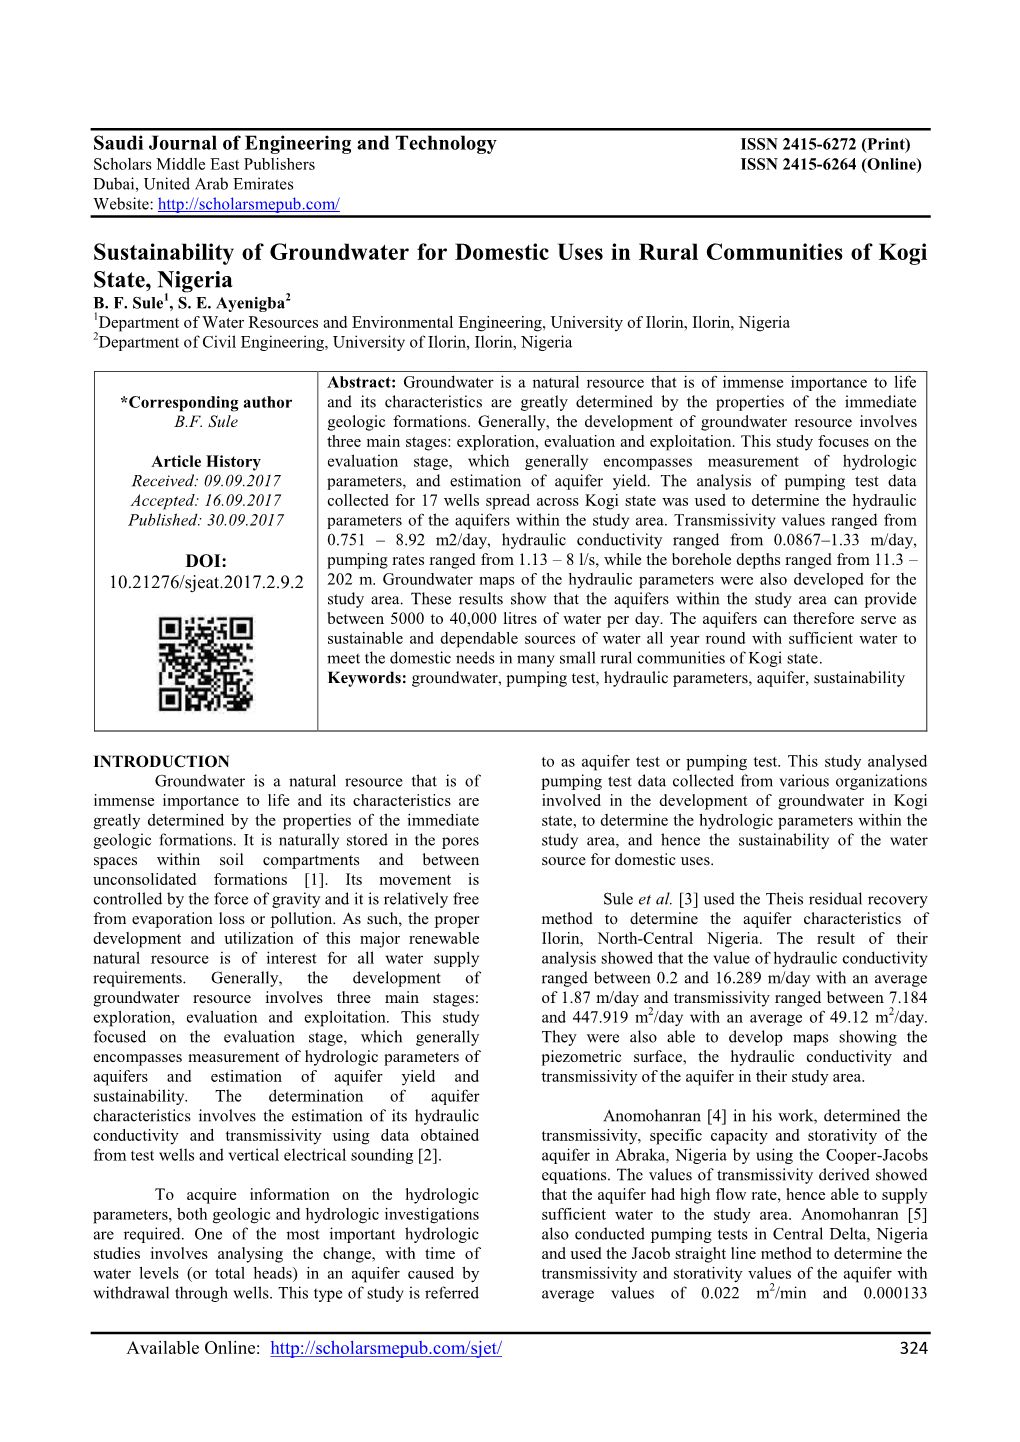 Sustainability of Groundwater for Domestic Uses in Rural Communities of Kogi State, Nigeria B